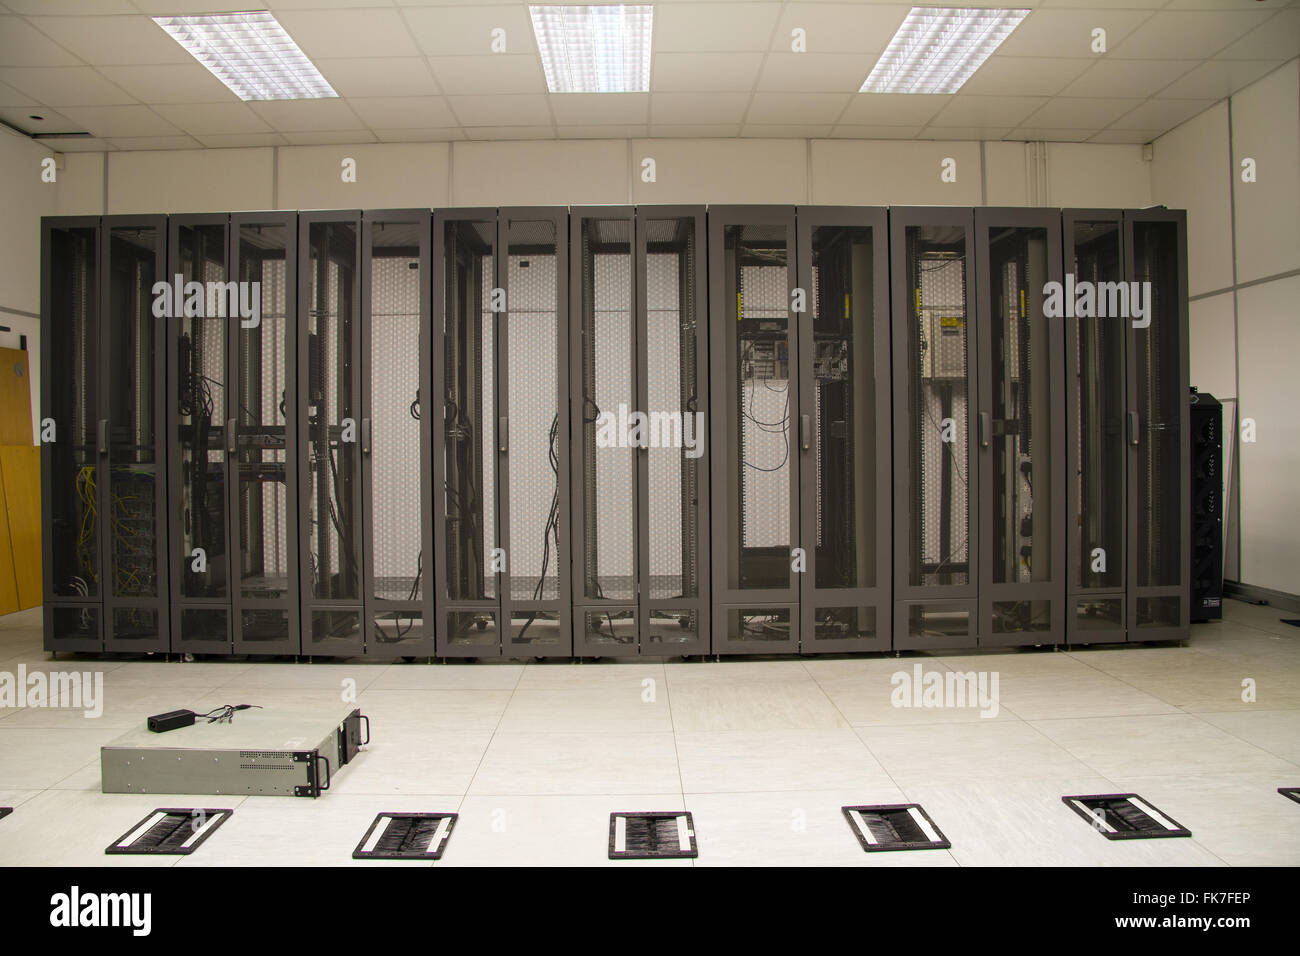 Server farm security cabinets in server room during installation. Stock Photo